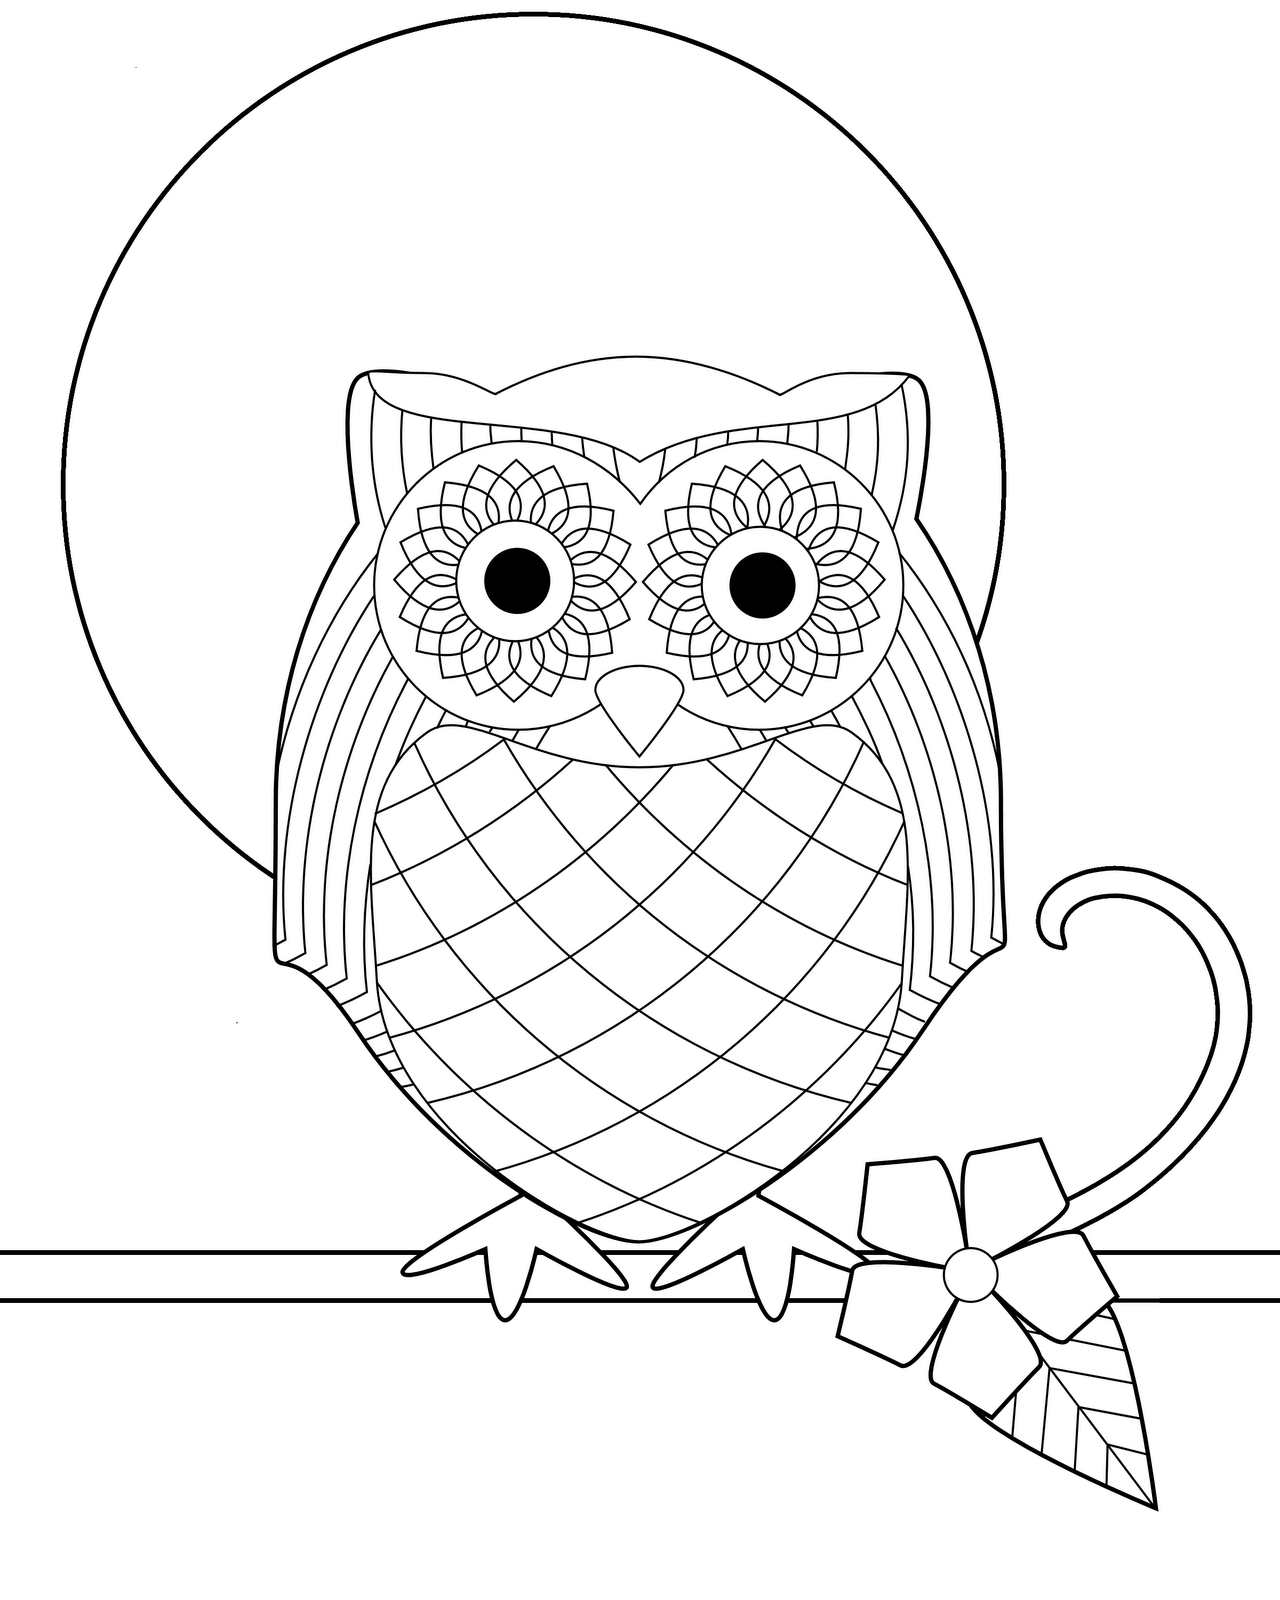 Baby-Owl-Coloring-Pages.png